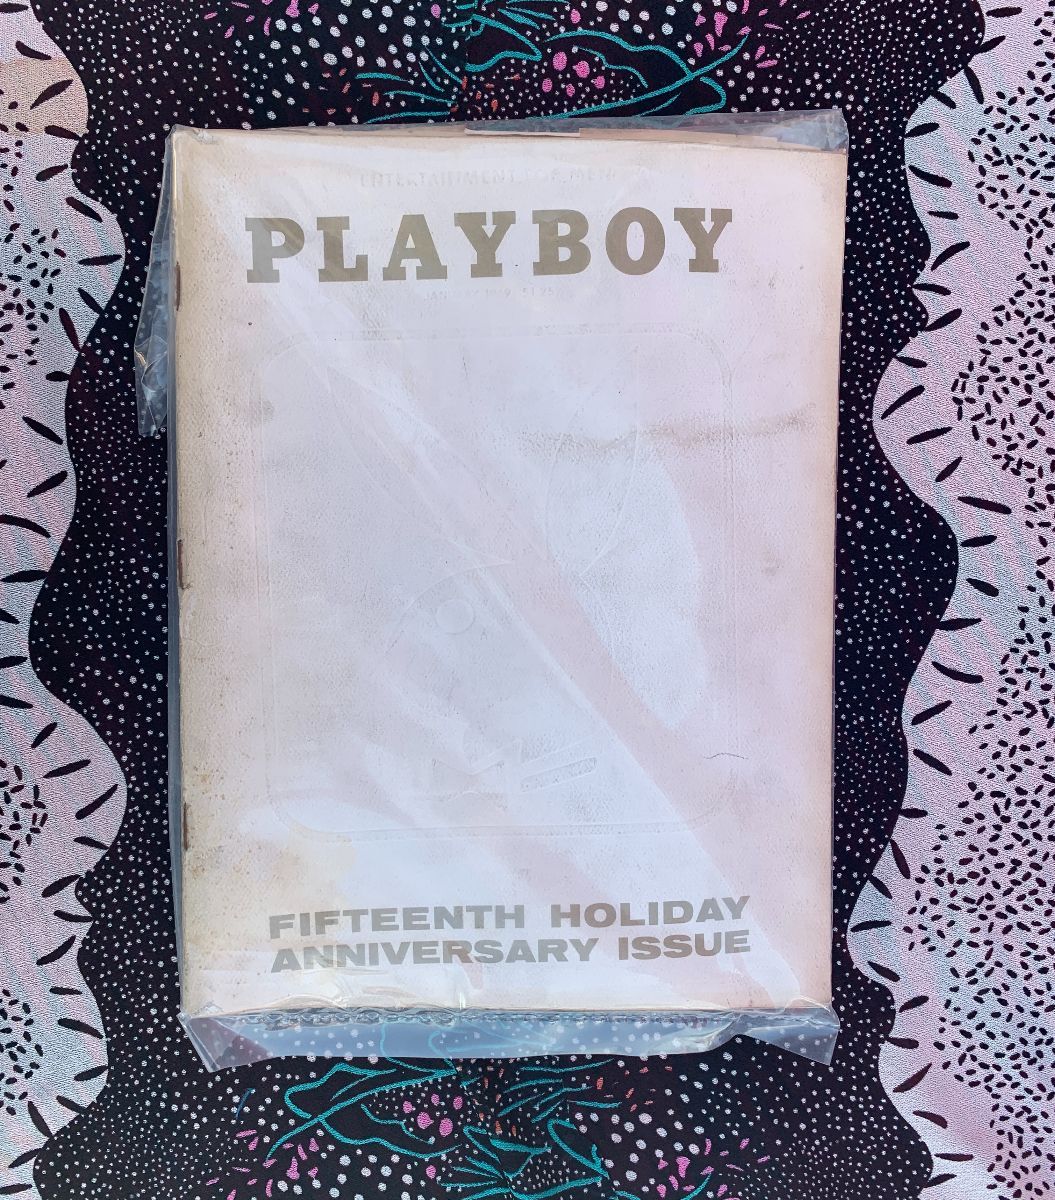 product details: PLAYBOY MAGAZINE |  JANUARY 1969 |  15TH HOLIDAY ANNIVERSARY ISSUE AS-IS photo